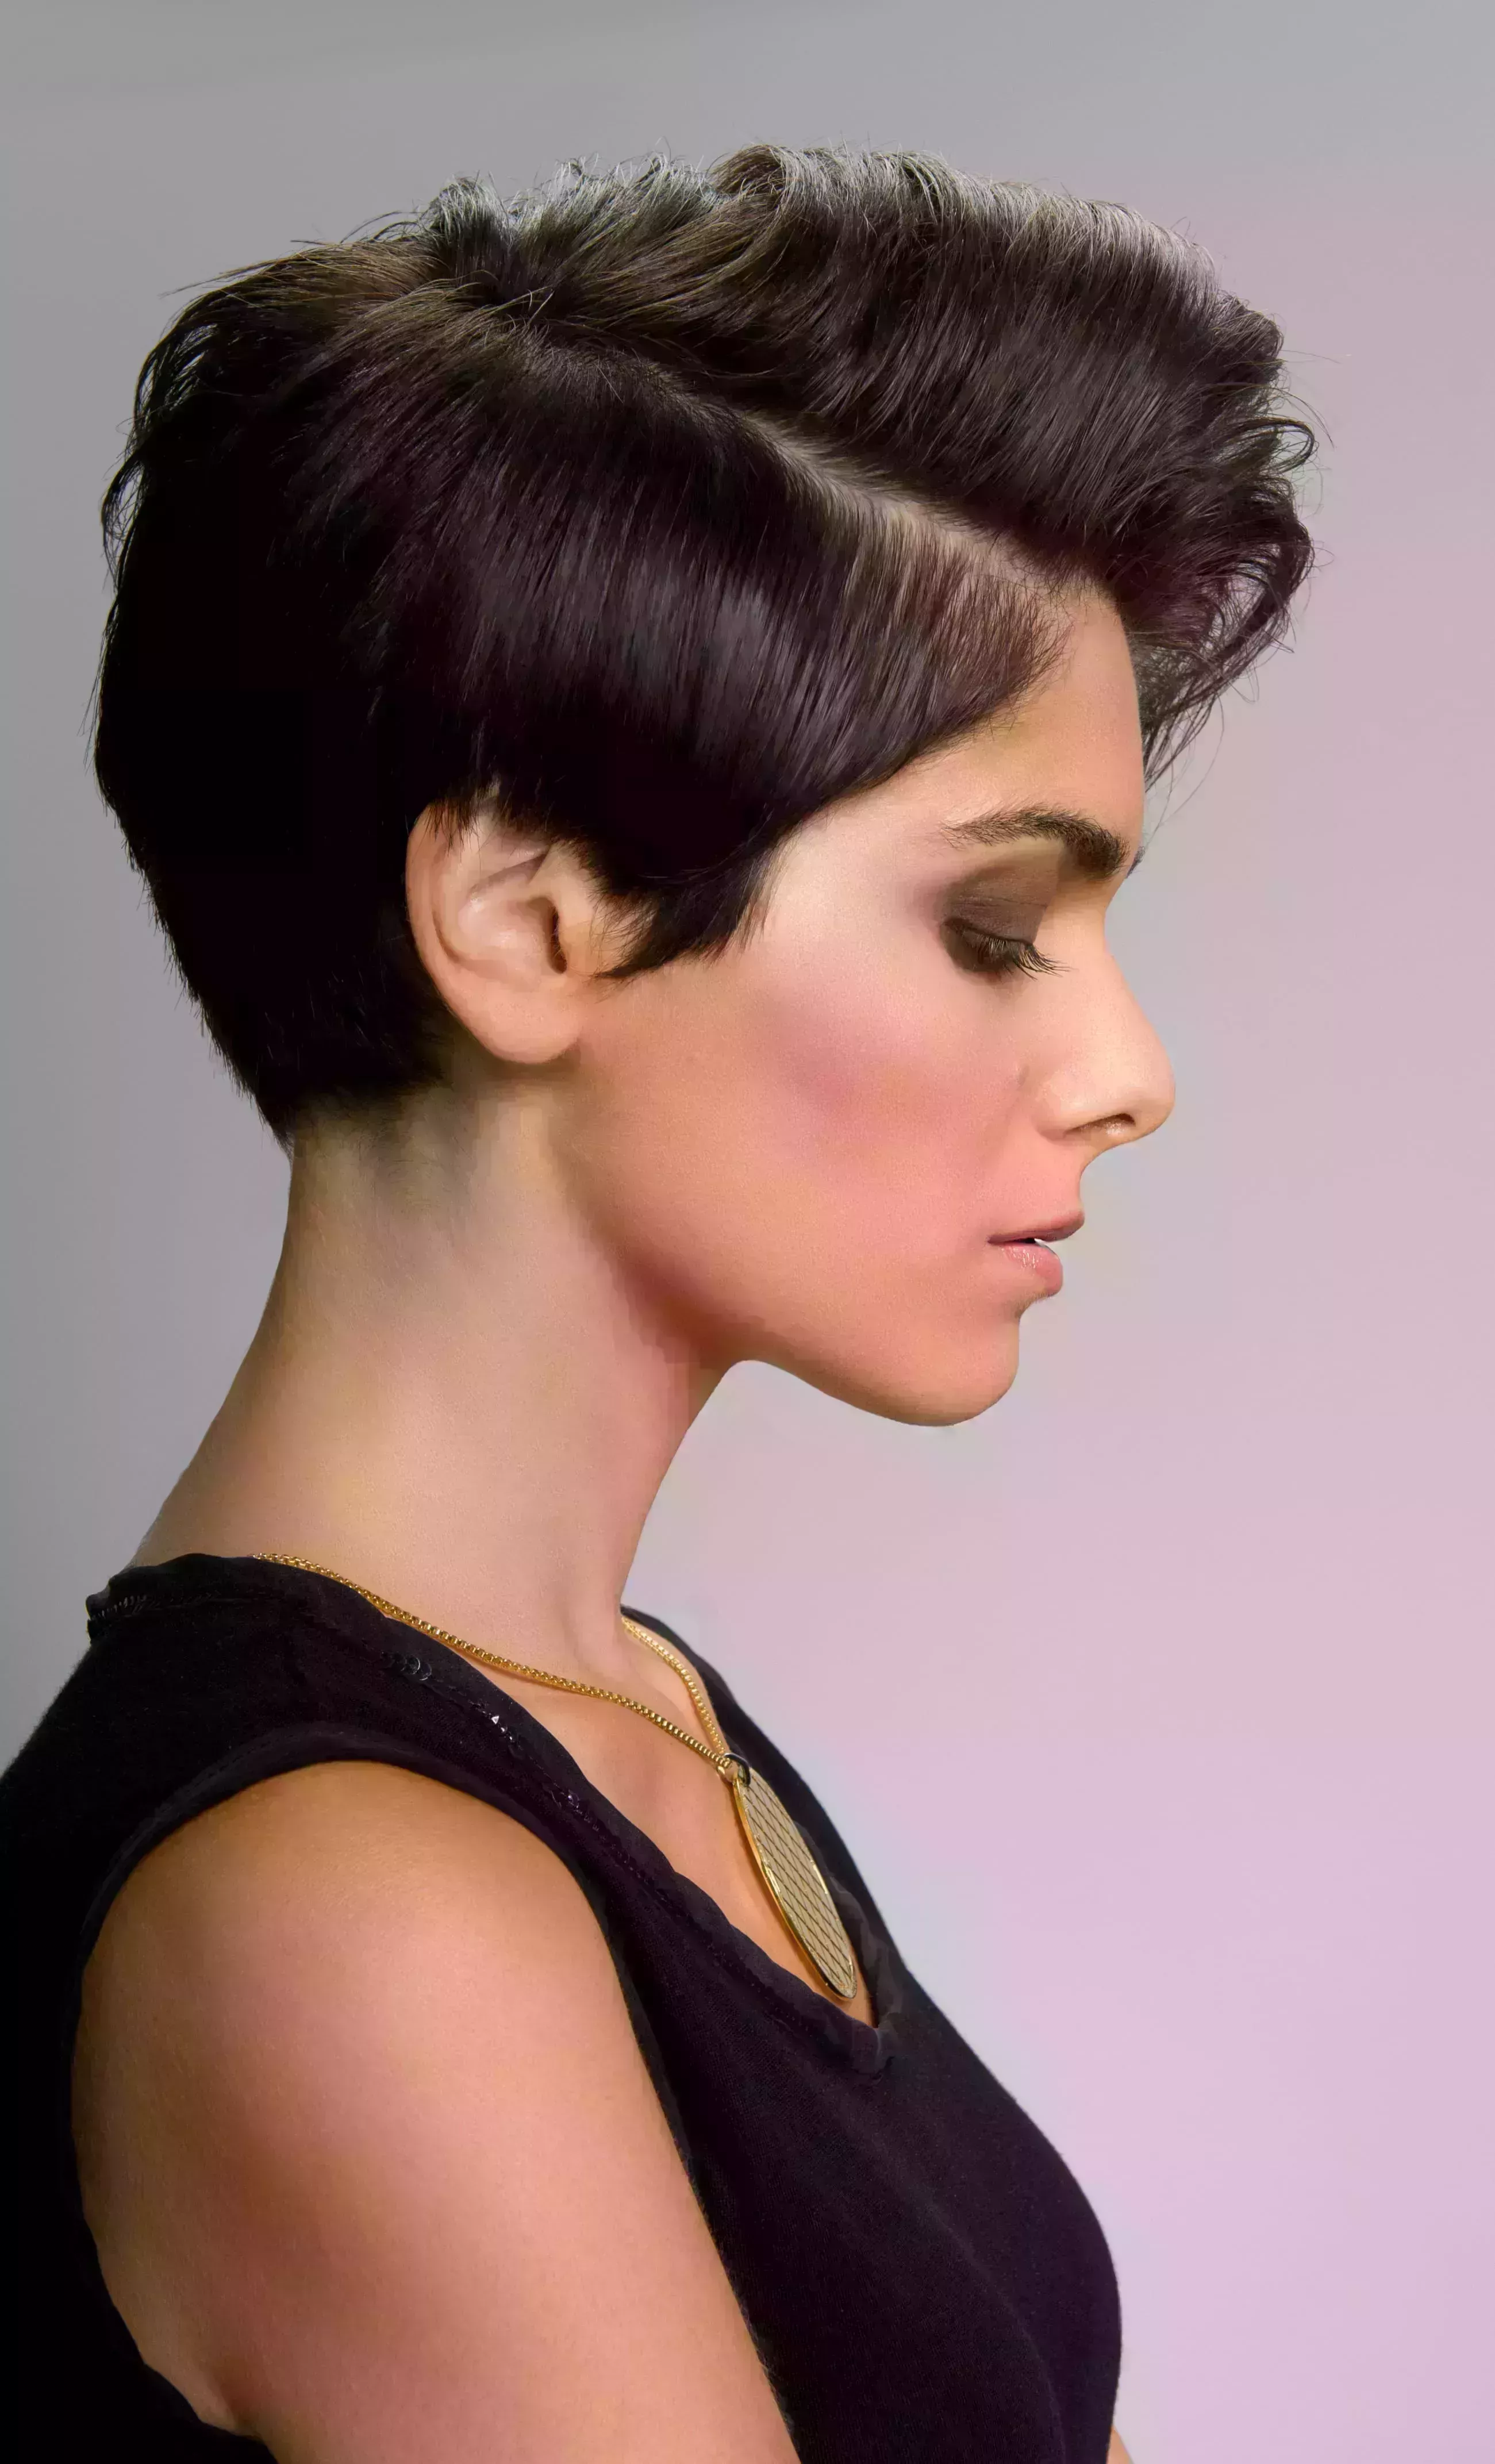 Long Layered Crop with Quiff